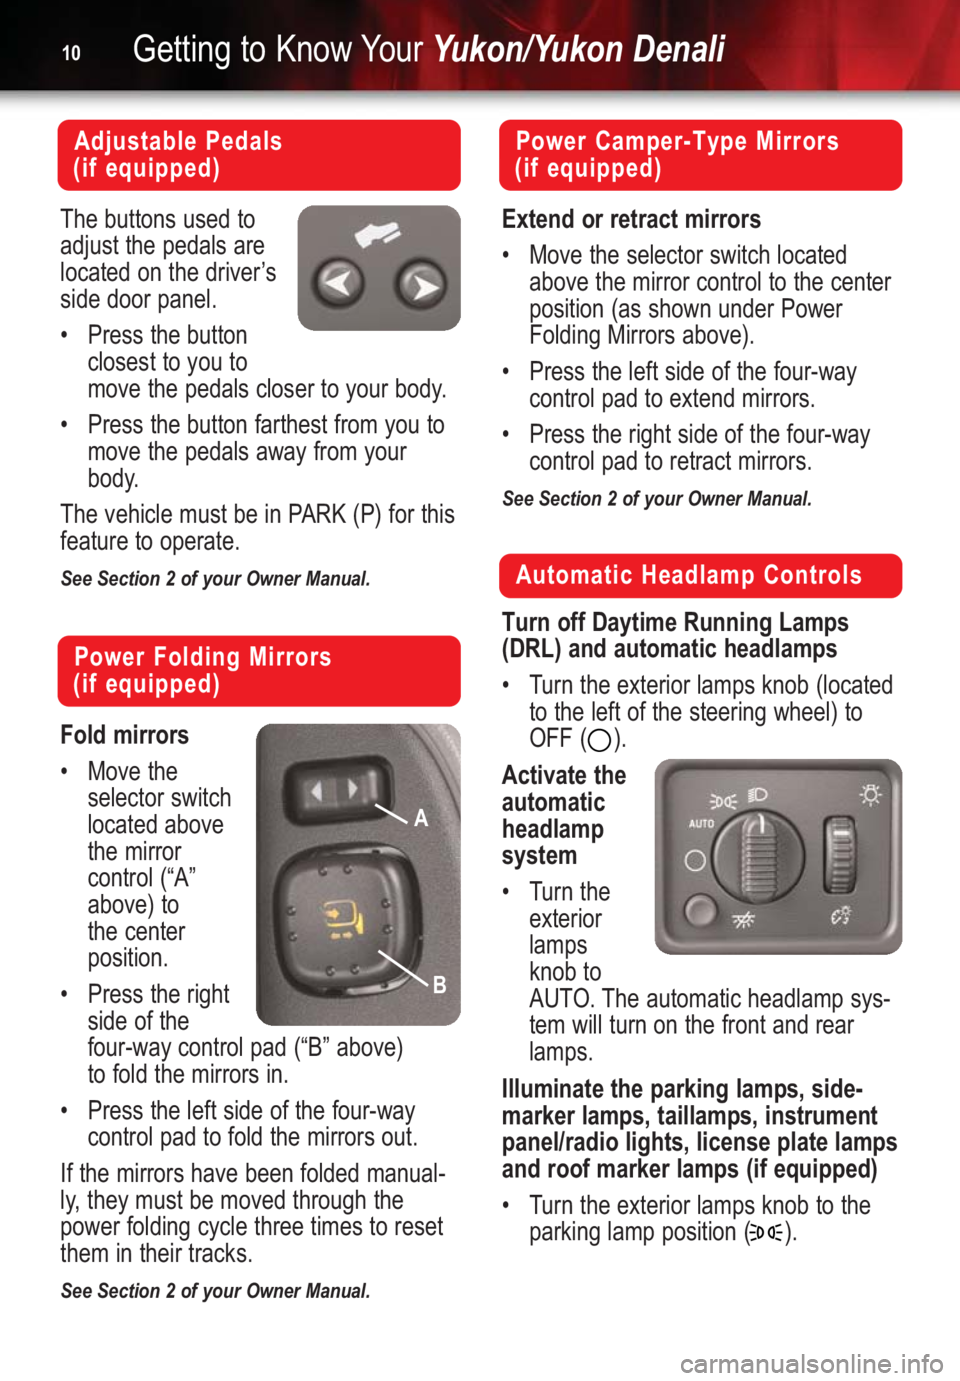 GMC YUKON 2004  Get To Know Guide Getting to Know YourYukon/Yukon Denali10
Automatic Headlamp Controls
Turn off Daytime Running Lamps
(DRL) and automatic headlamps
•Turn the exterior lamps knob (located
to the left of the steering w